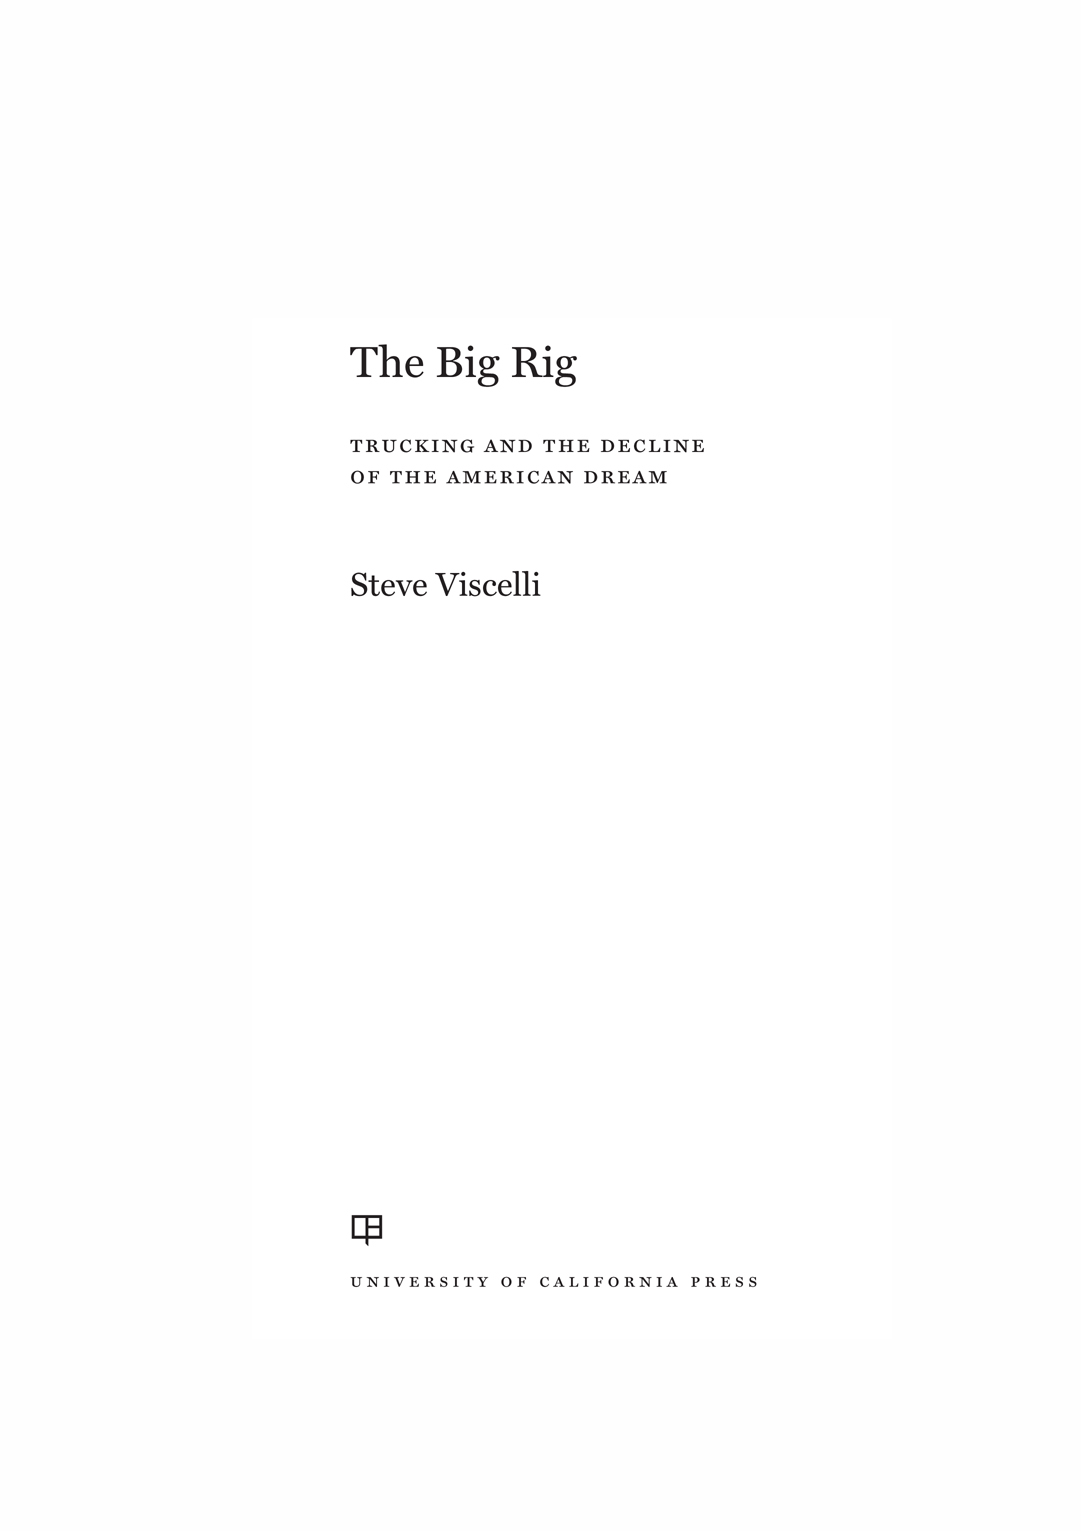 The Big Rig Copyright 2016 University of California Press All rights - photo 1